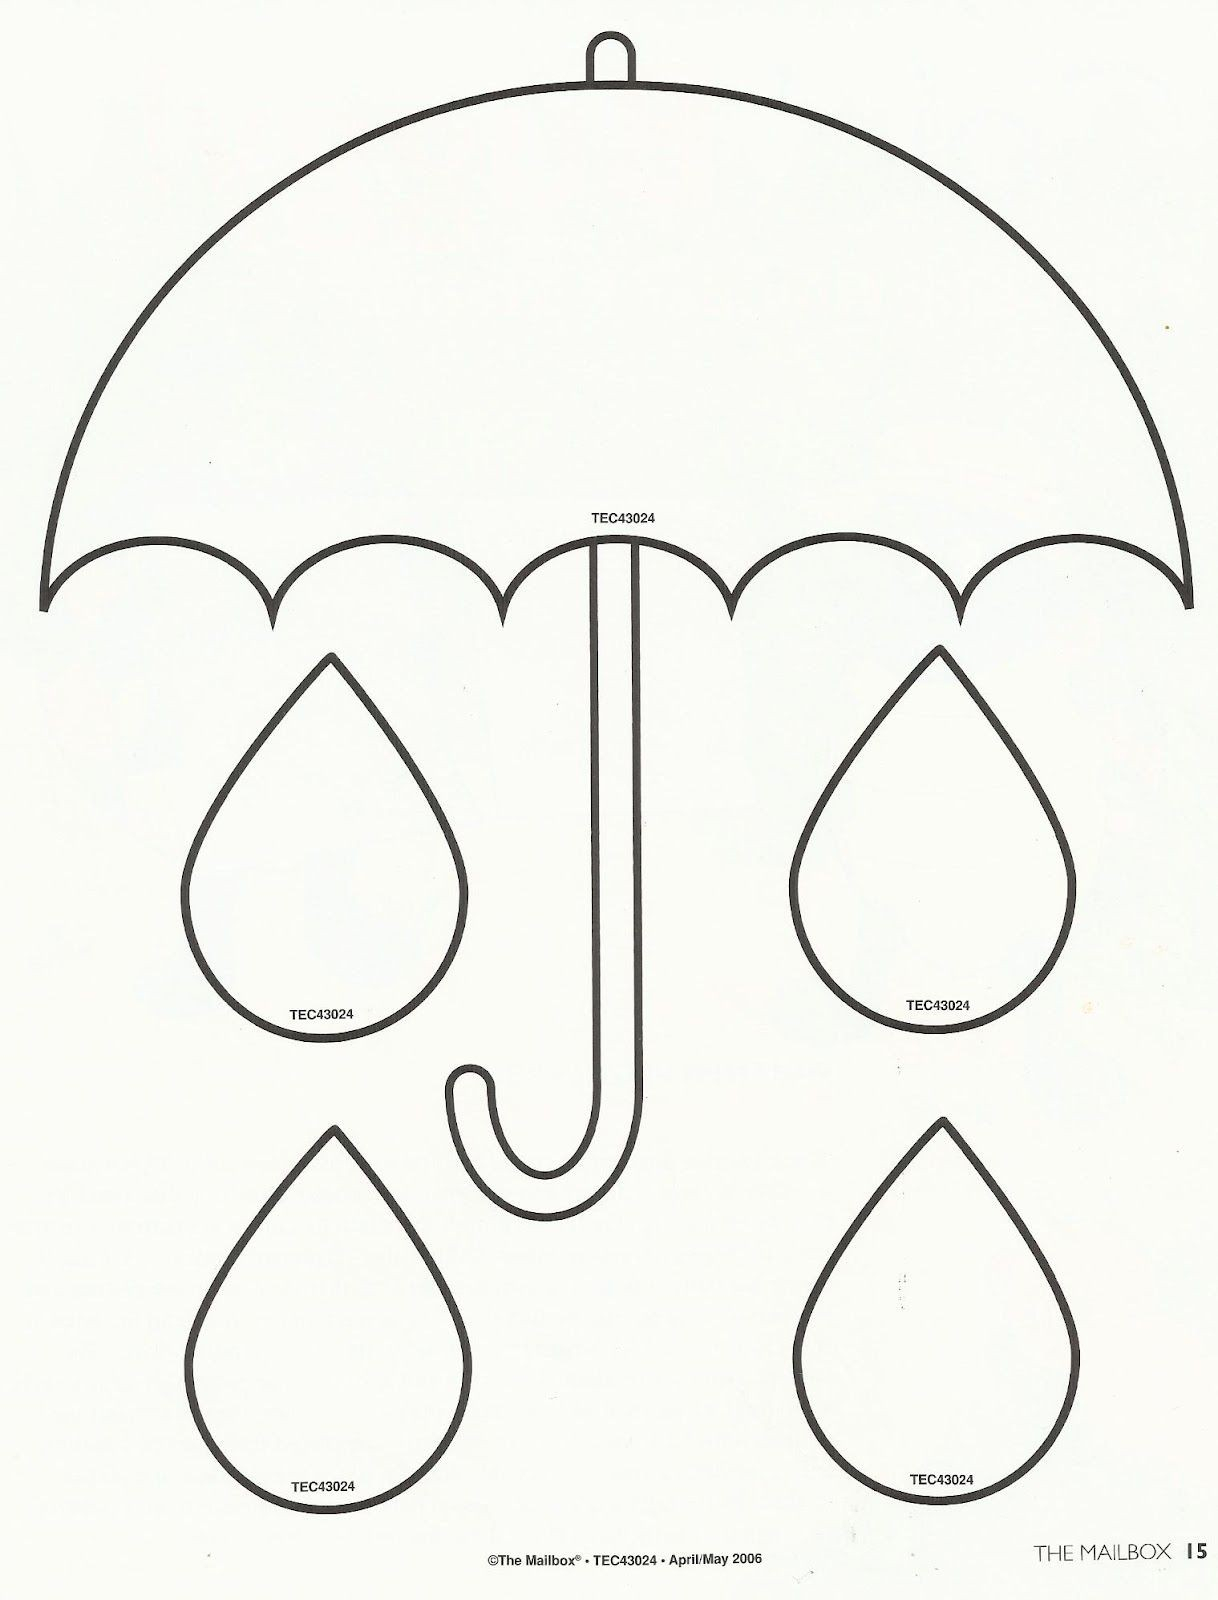 Raindrop Coloring Pages Umbrella With Raindrops Coloring Page Awesome Raindrops Coloring